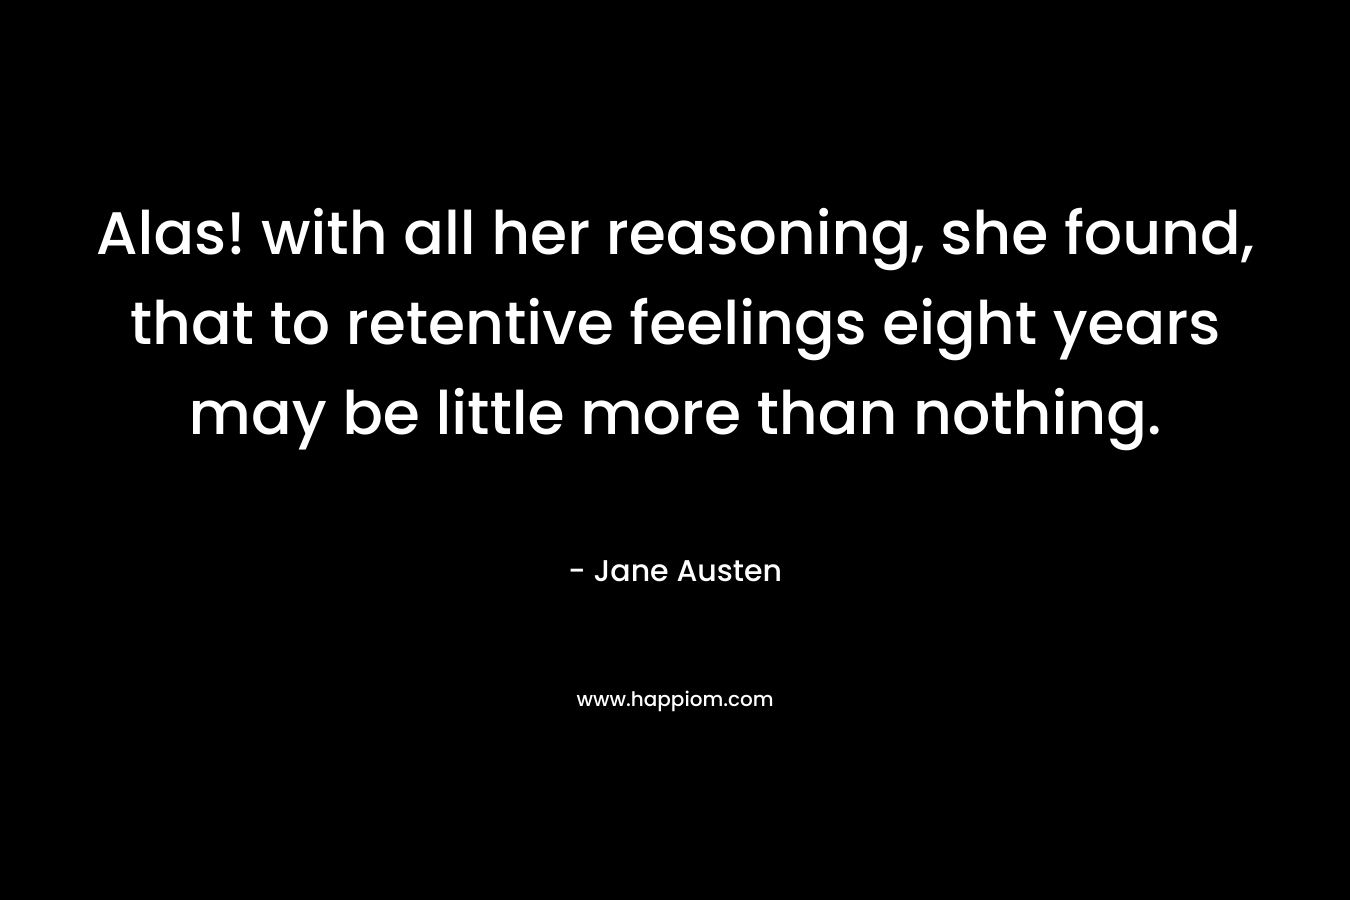 Alas! with all her reasoning, she found, that to retentive feelings eight years may be little more than nothing. – Jane Austen